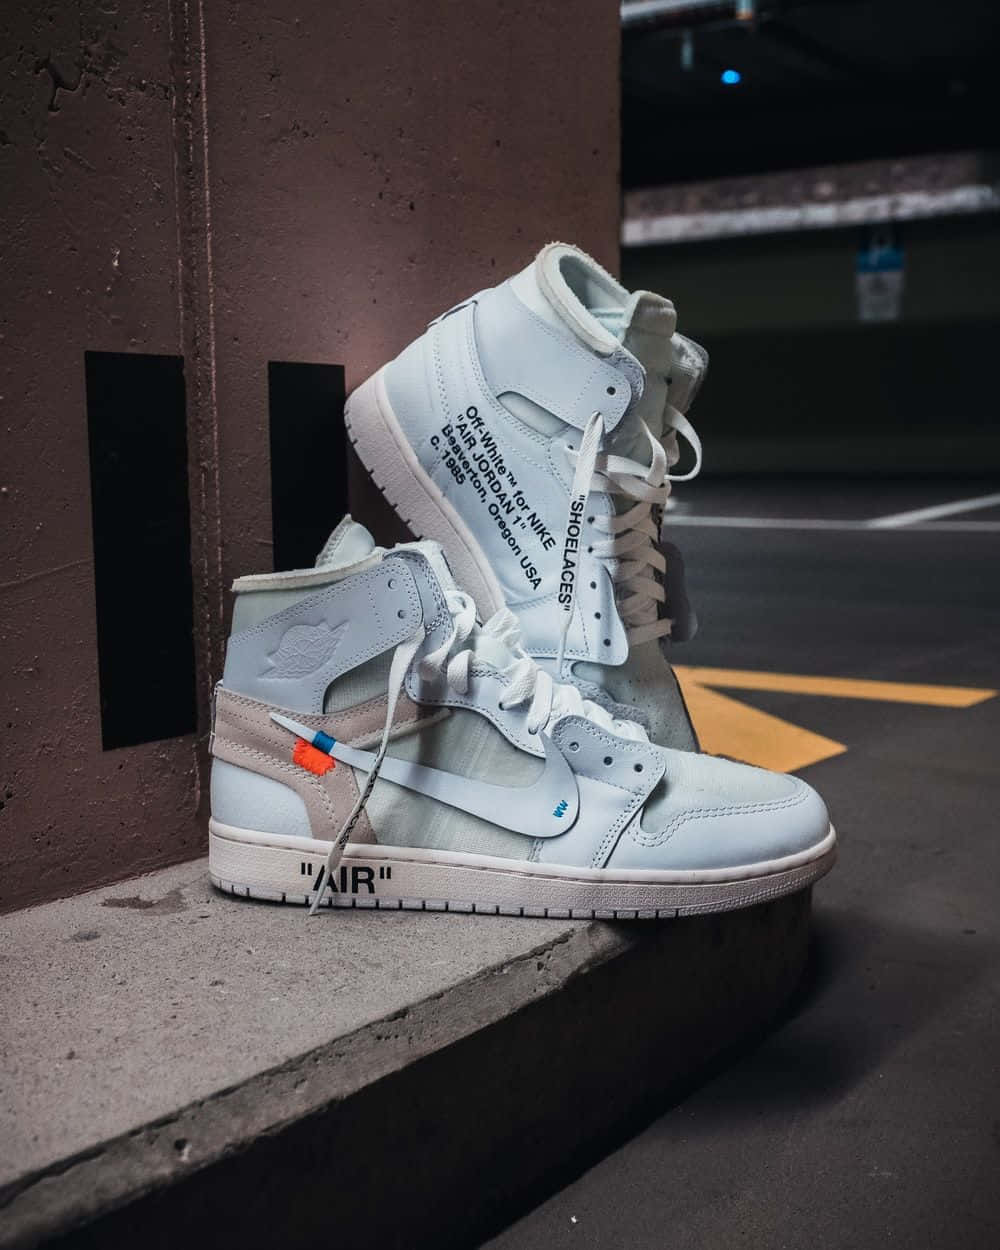 Download OffWhite X Nike Shoes Wallpaper  Wallpaperscom